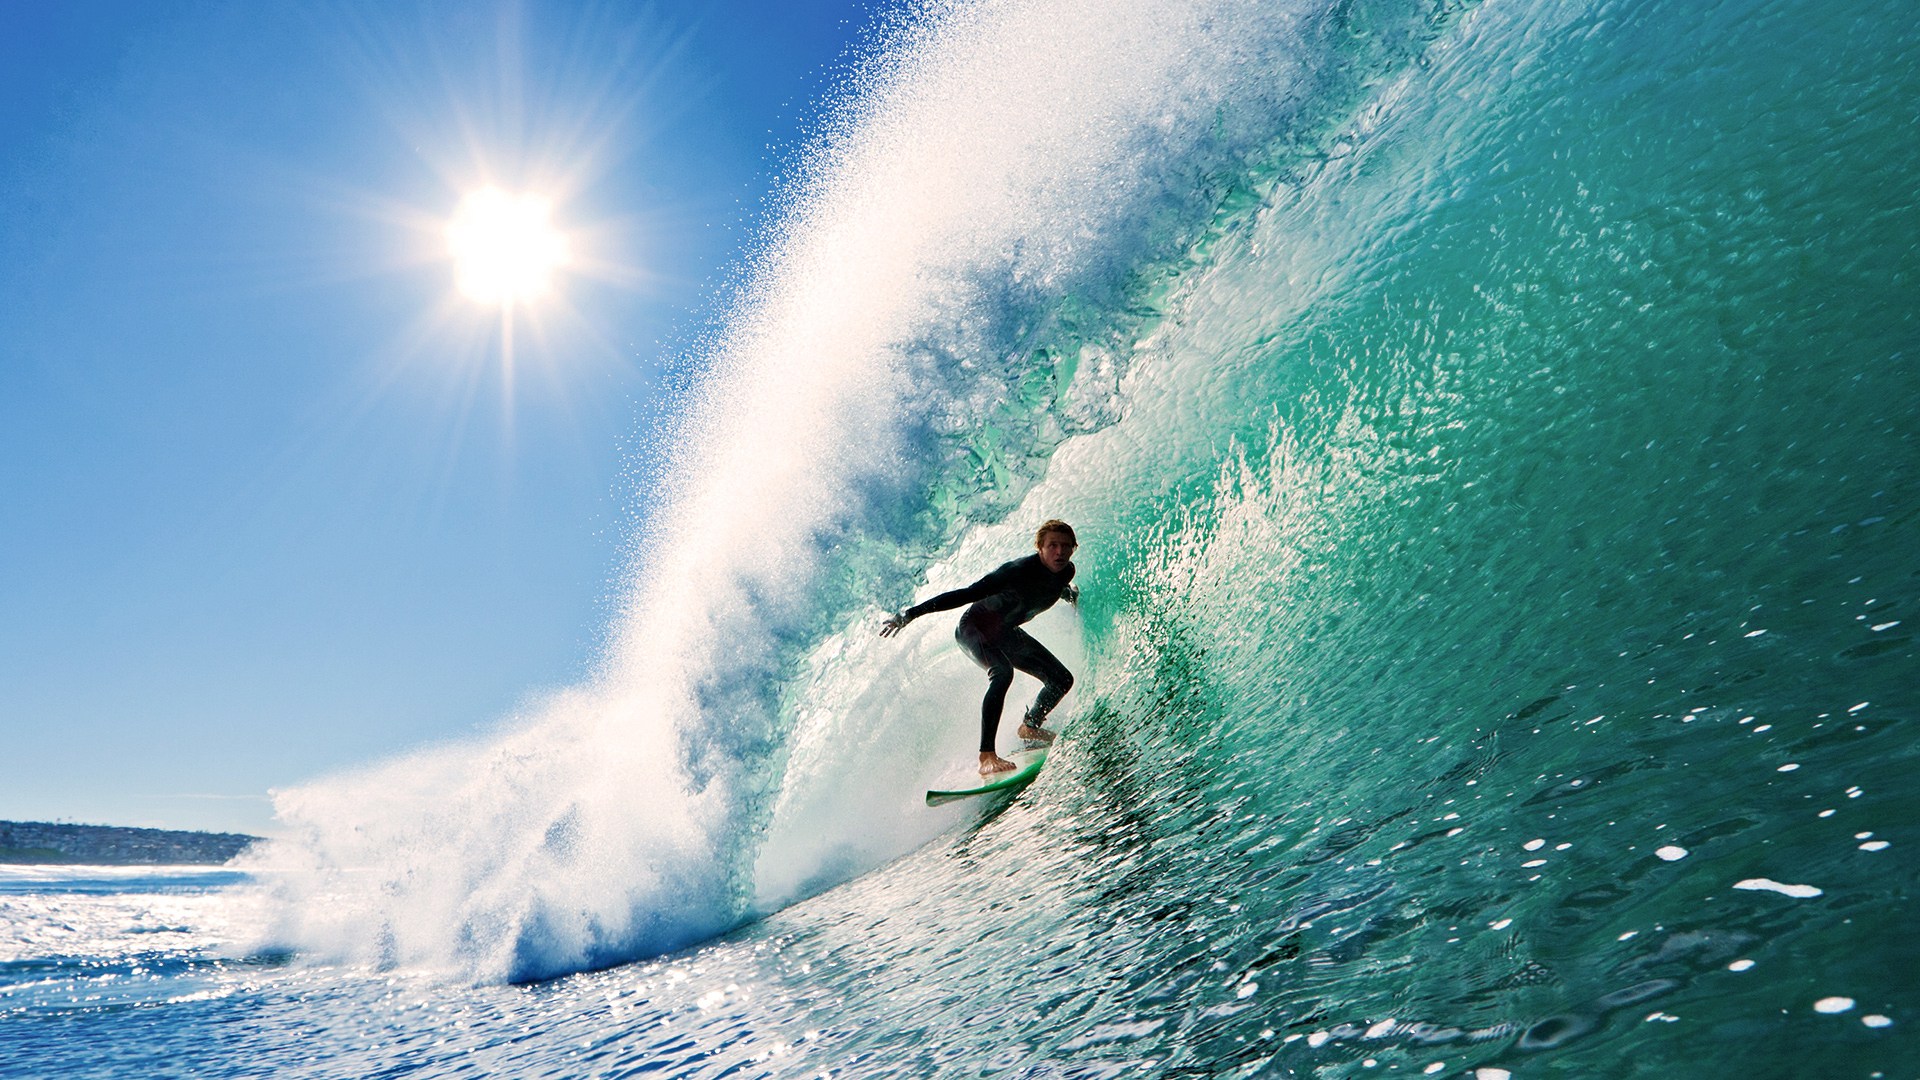 202 Surfing HD Wallpapers Backgrounds - Wallpaper Abyss